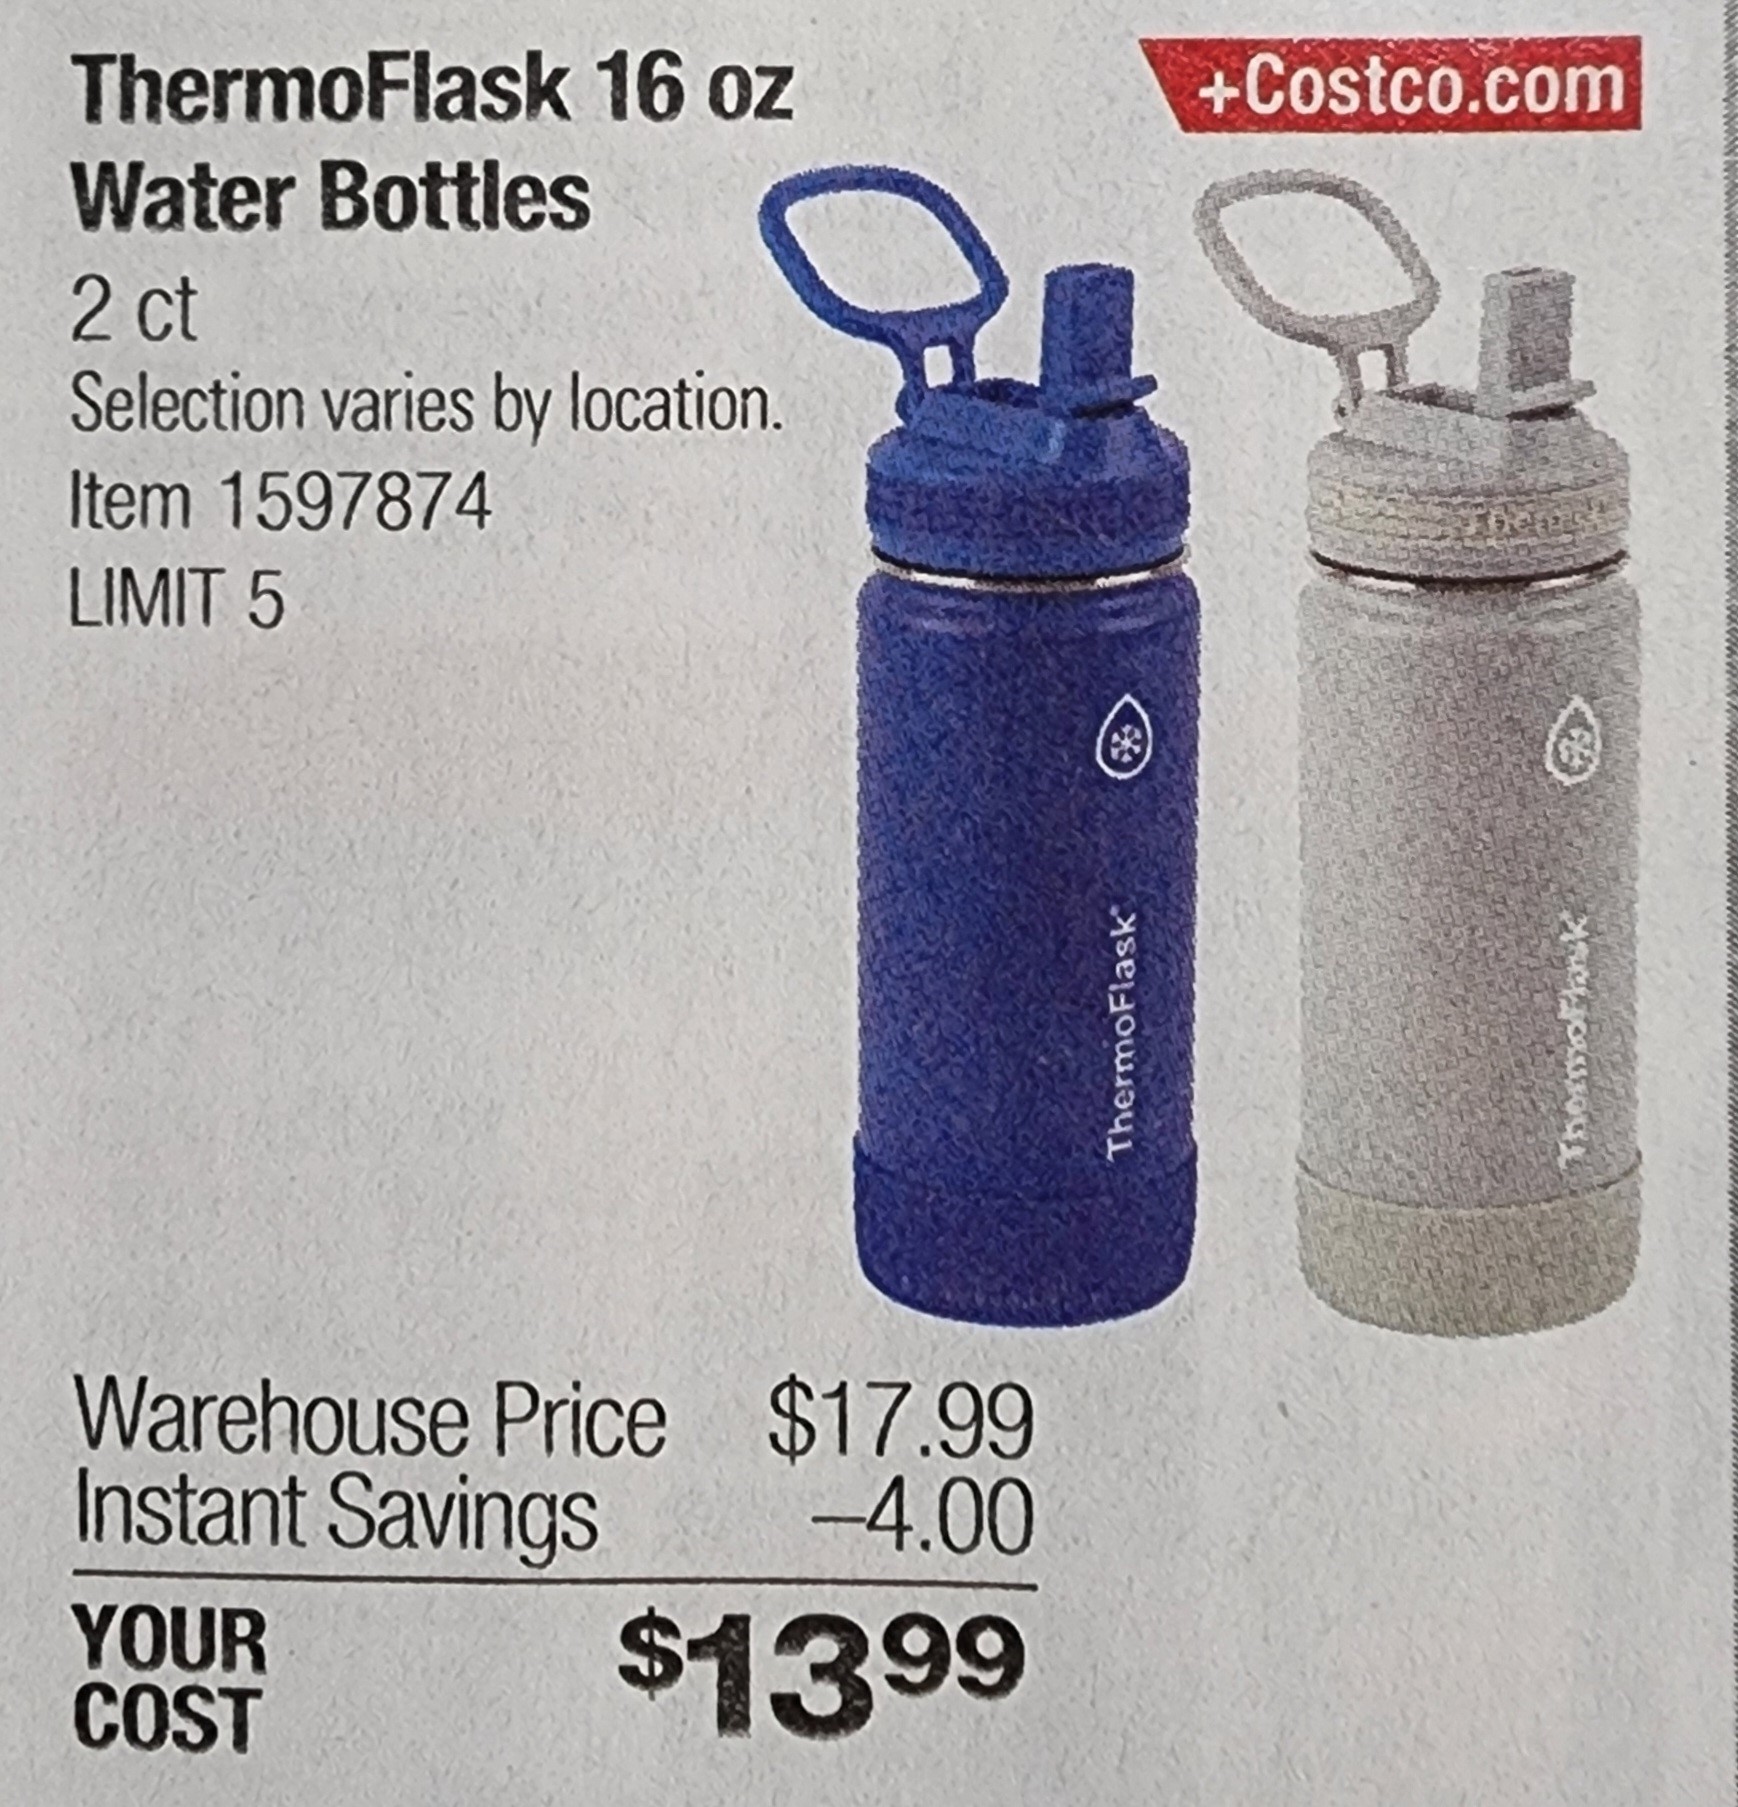 Thermoflask 16 oz. stainless steel water bottle 2-pack @ Costco in-store only = $13.99